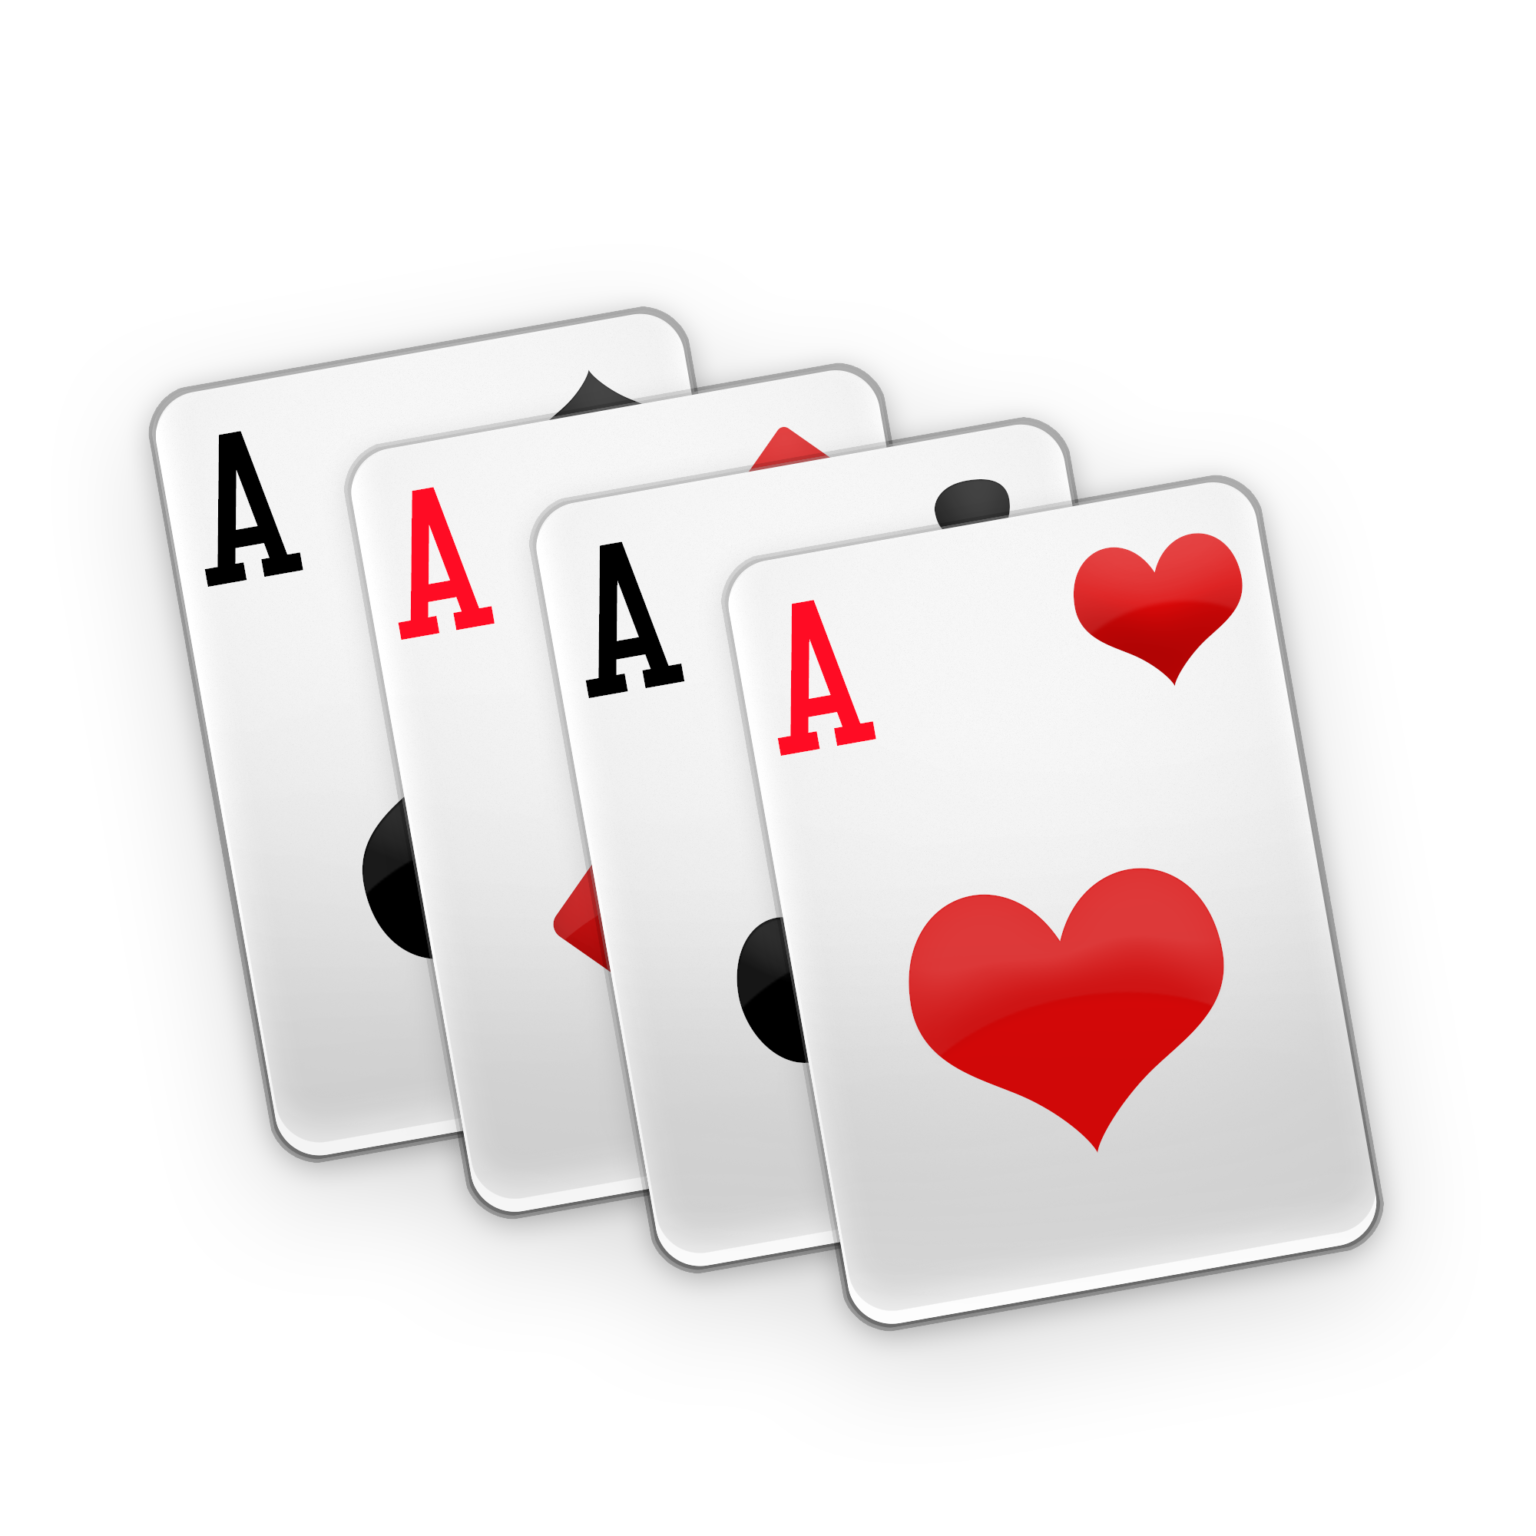 Solitaire Games have never been better than 24/7 Solitaire! This is one of  the classic card games you can now fin…